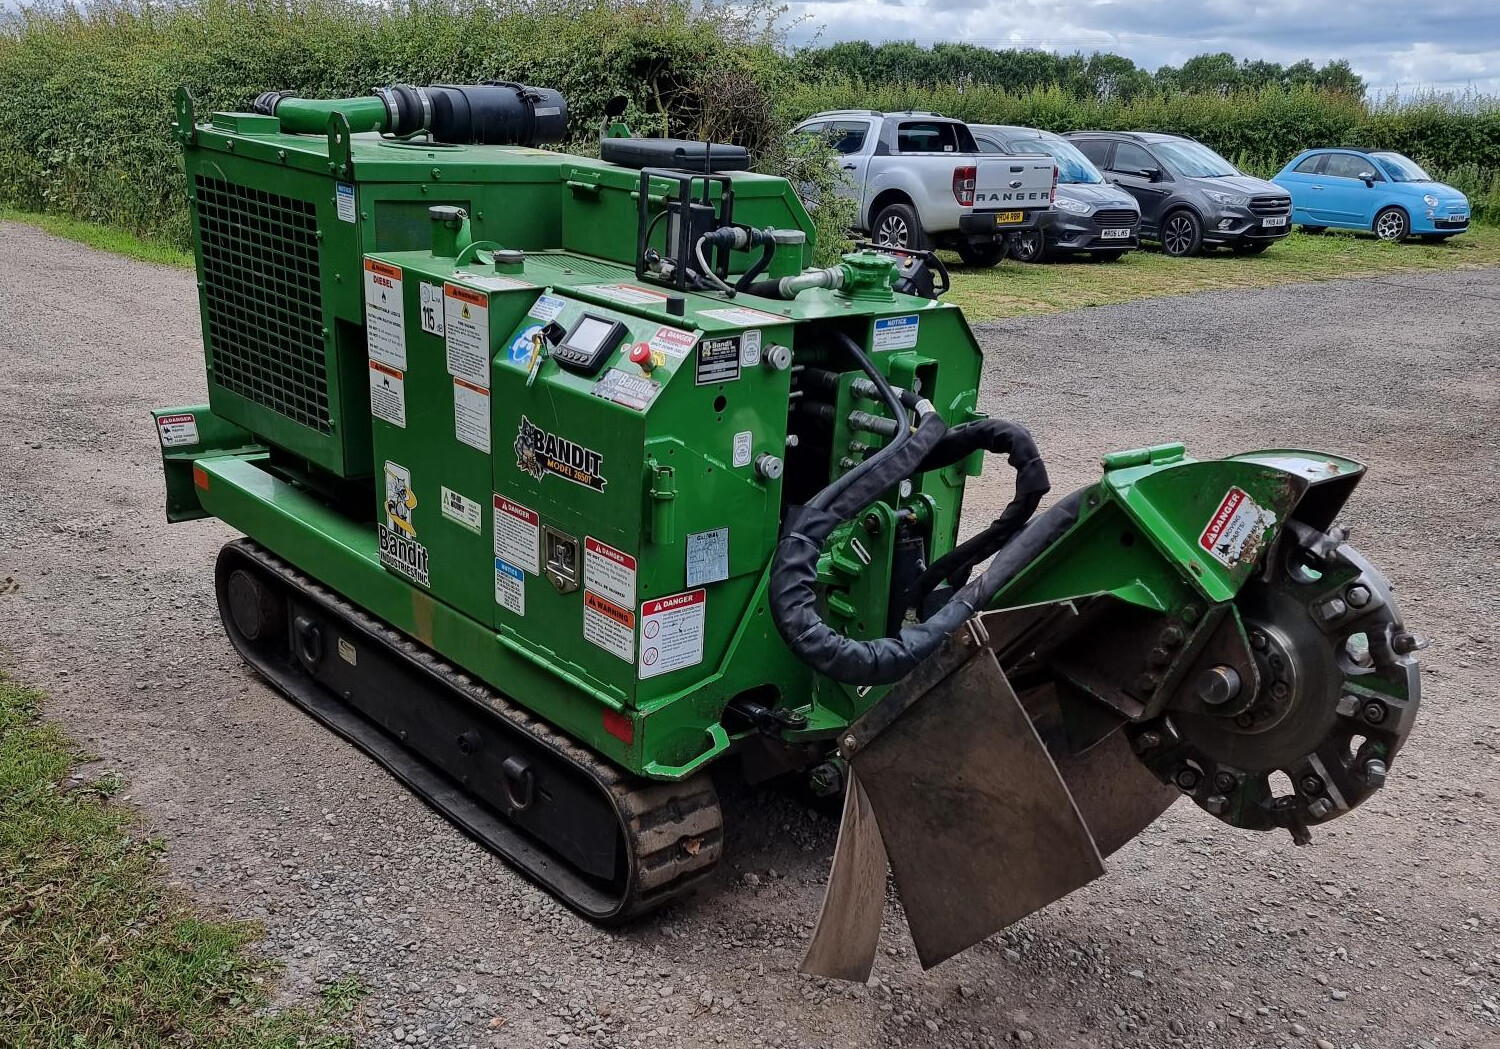 Large bandit stump grinder in tracks available for hire in York and across North england